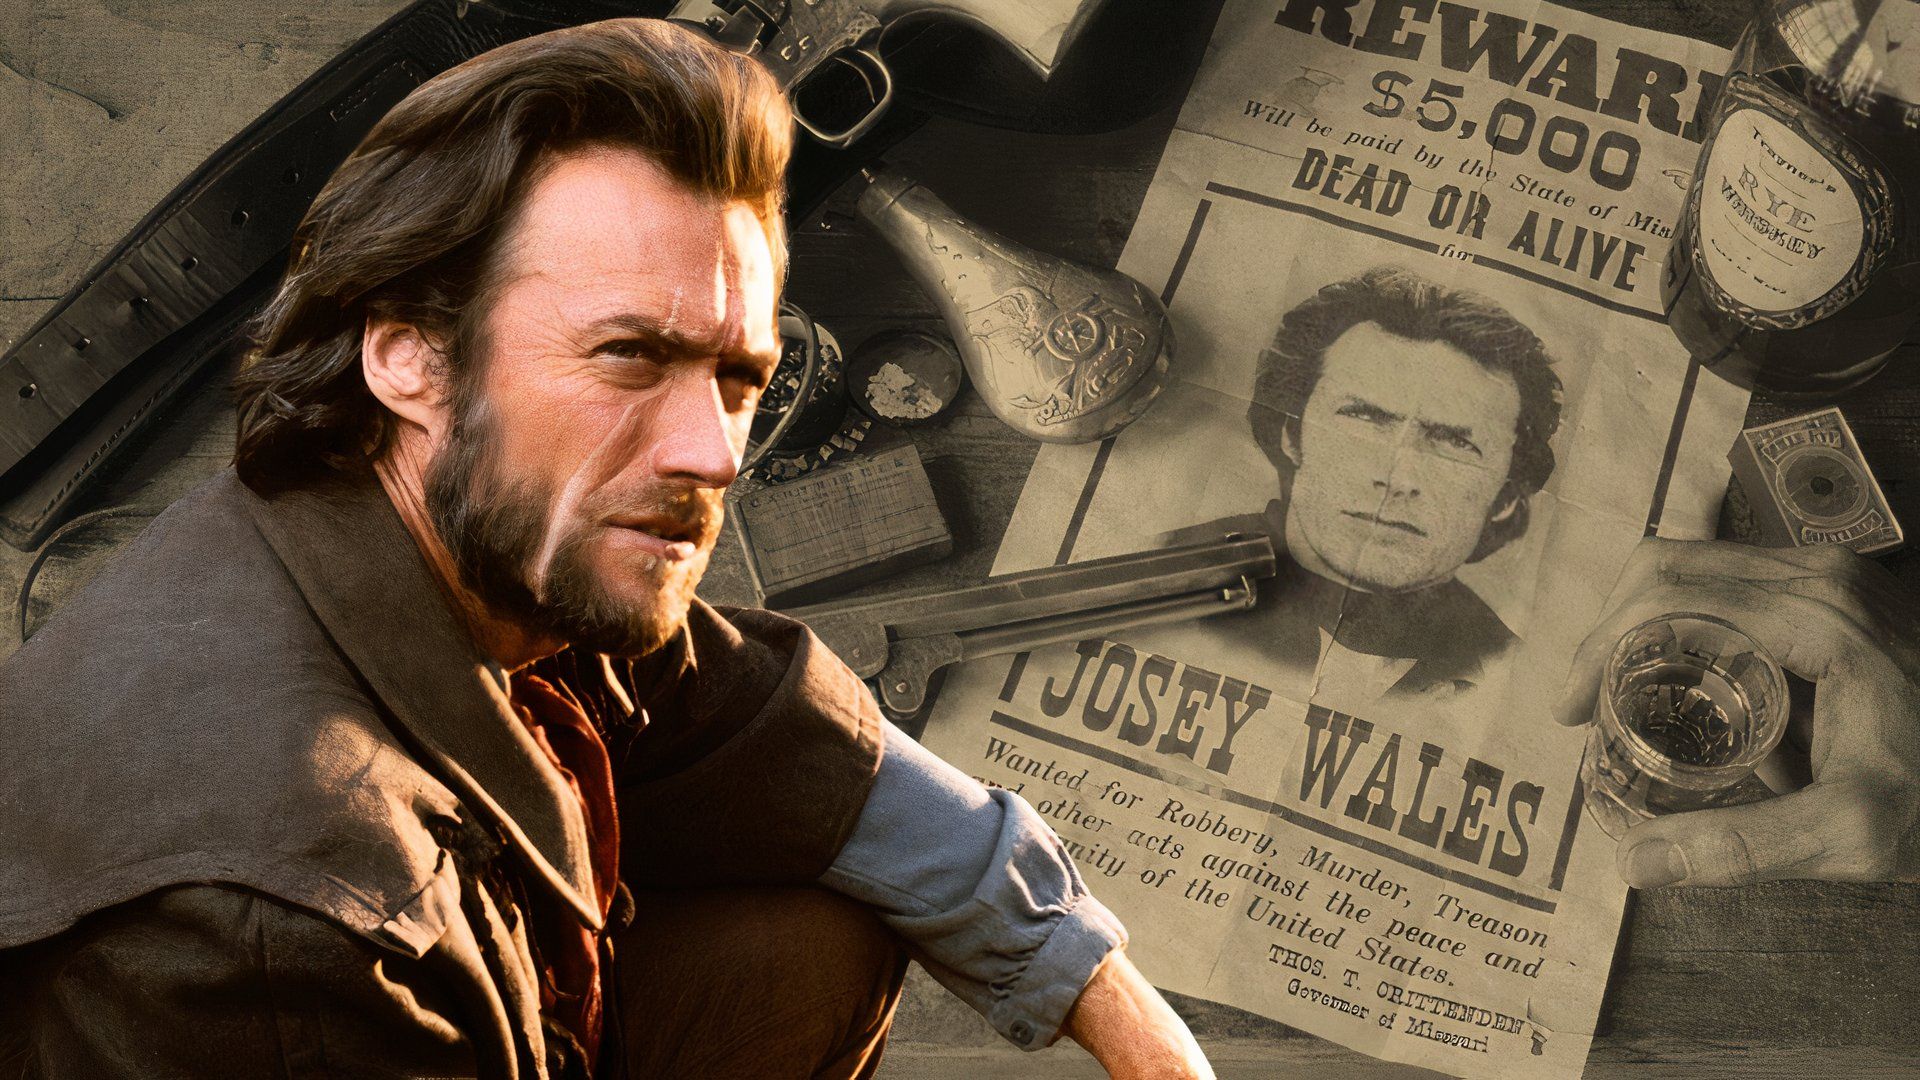 An edited image of Clint Eastwood next to a wanted sign with his face on it in The Outlaw Josey Wales